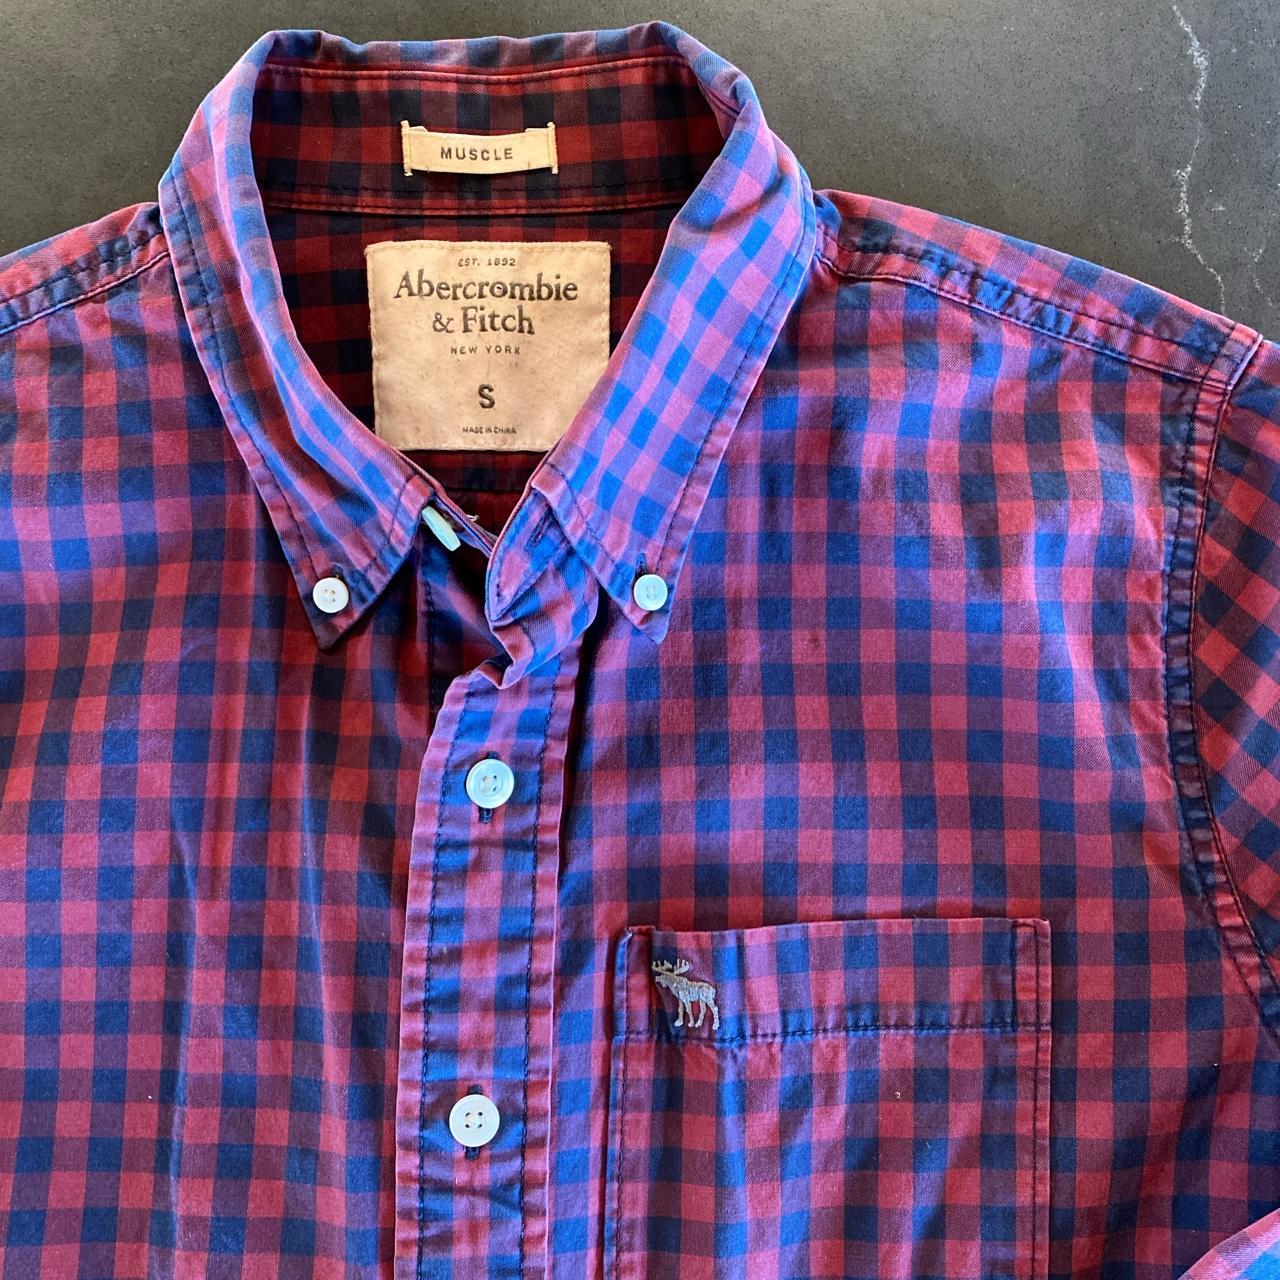 Abercrombie & Fitch Men's Blue and Red Shirt